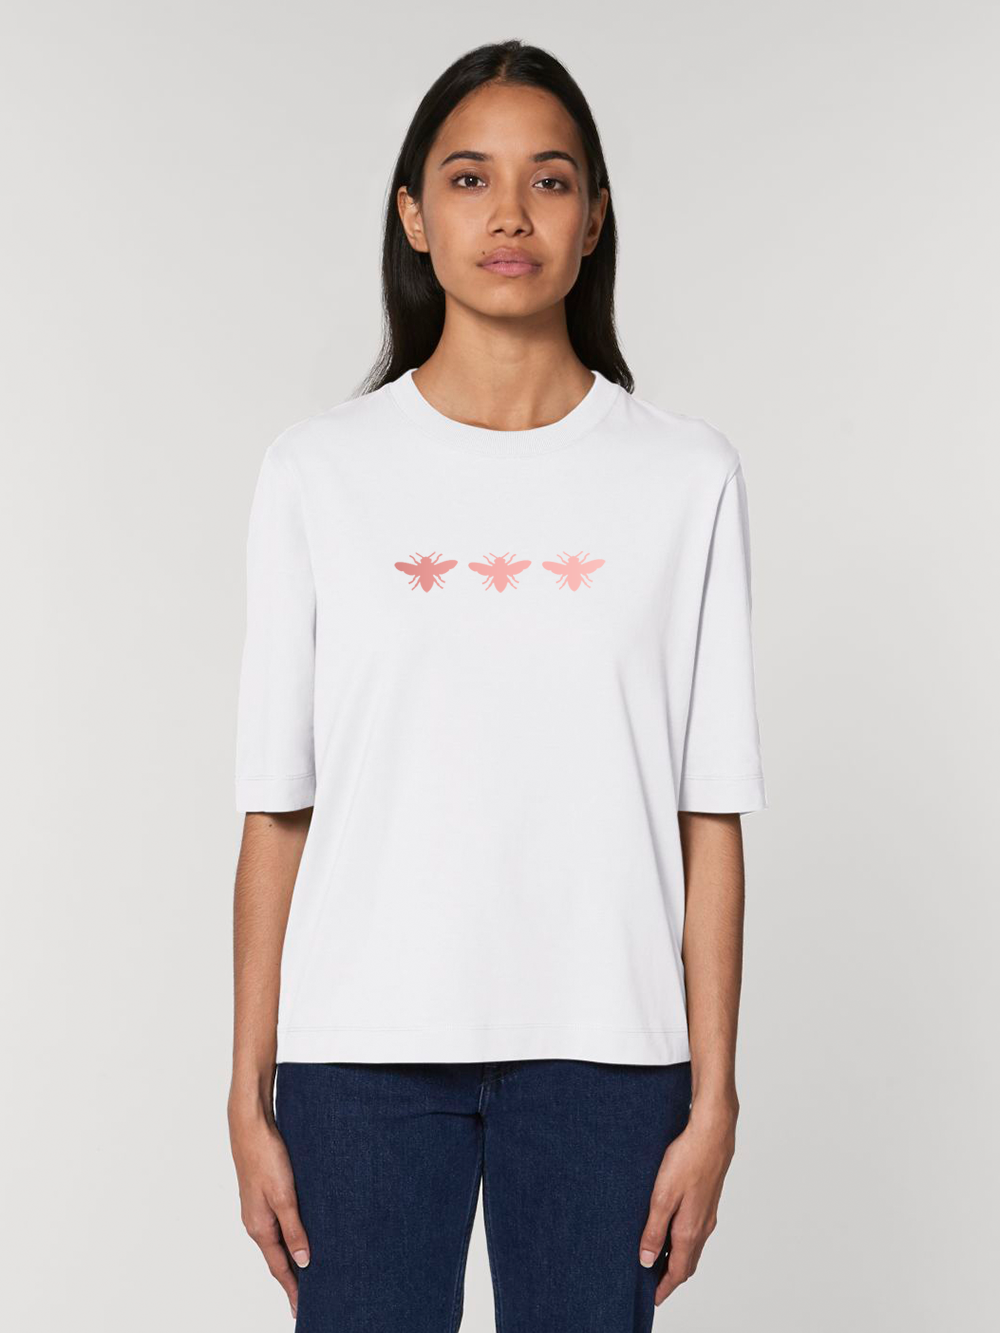 3/4 Length Sleeve Tshirt – White And Rose Gold Bees